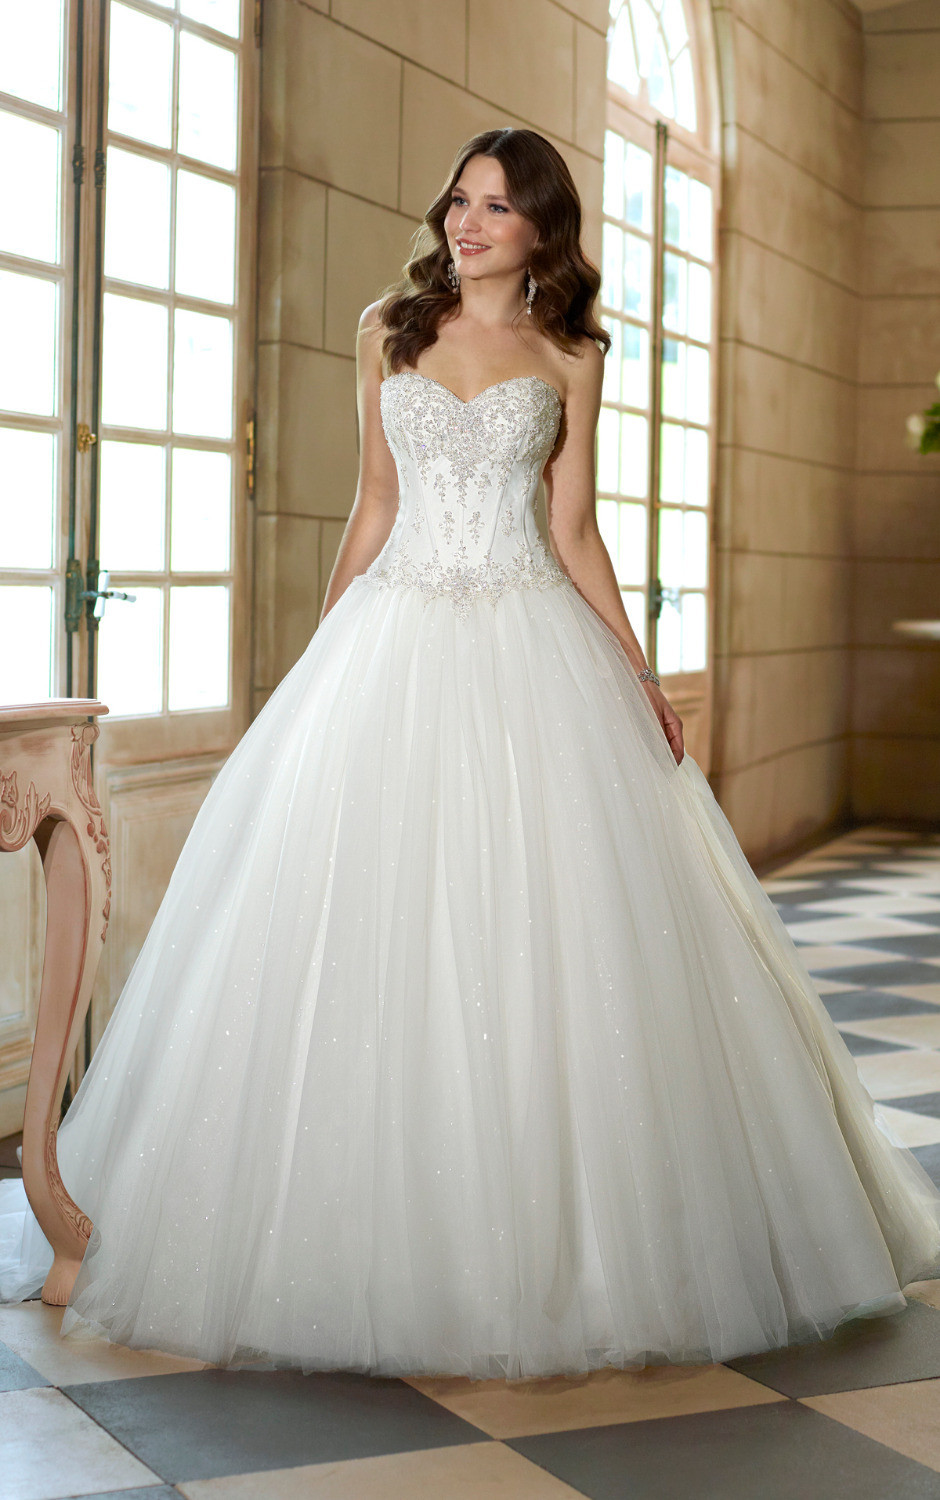 Wedding Dresses Princess
 2014 Sweetheart Beaded Lace Sparkle Ball Gown Princess